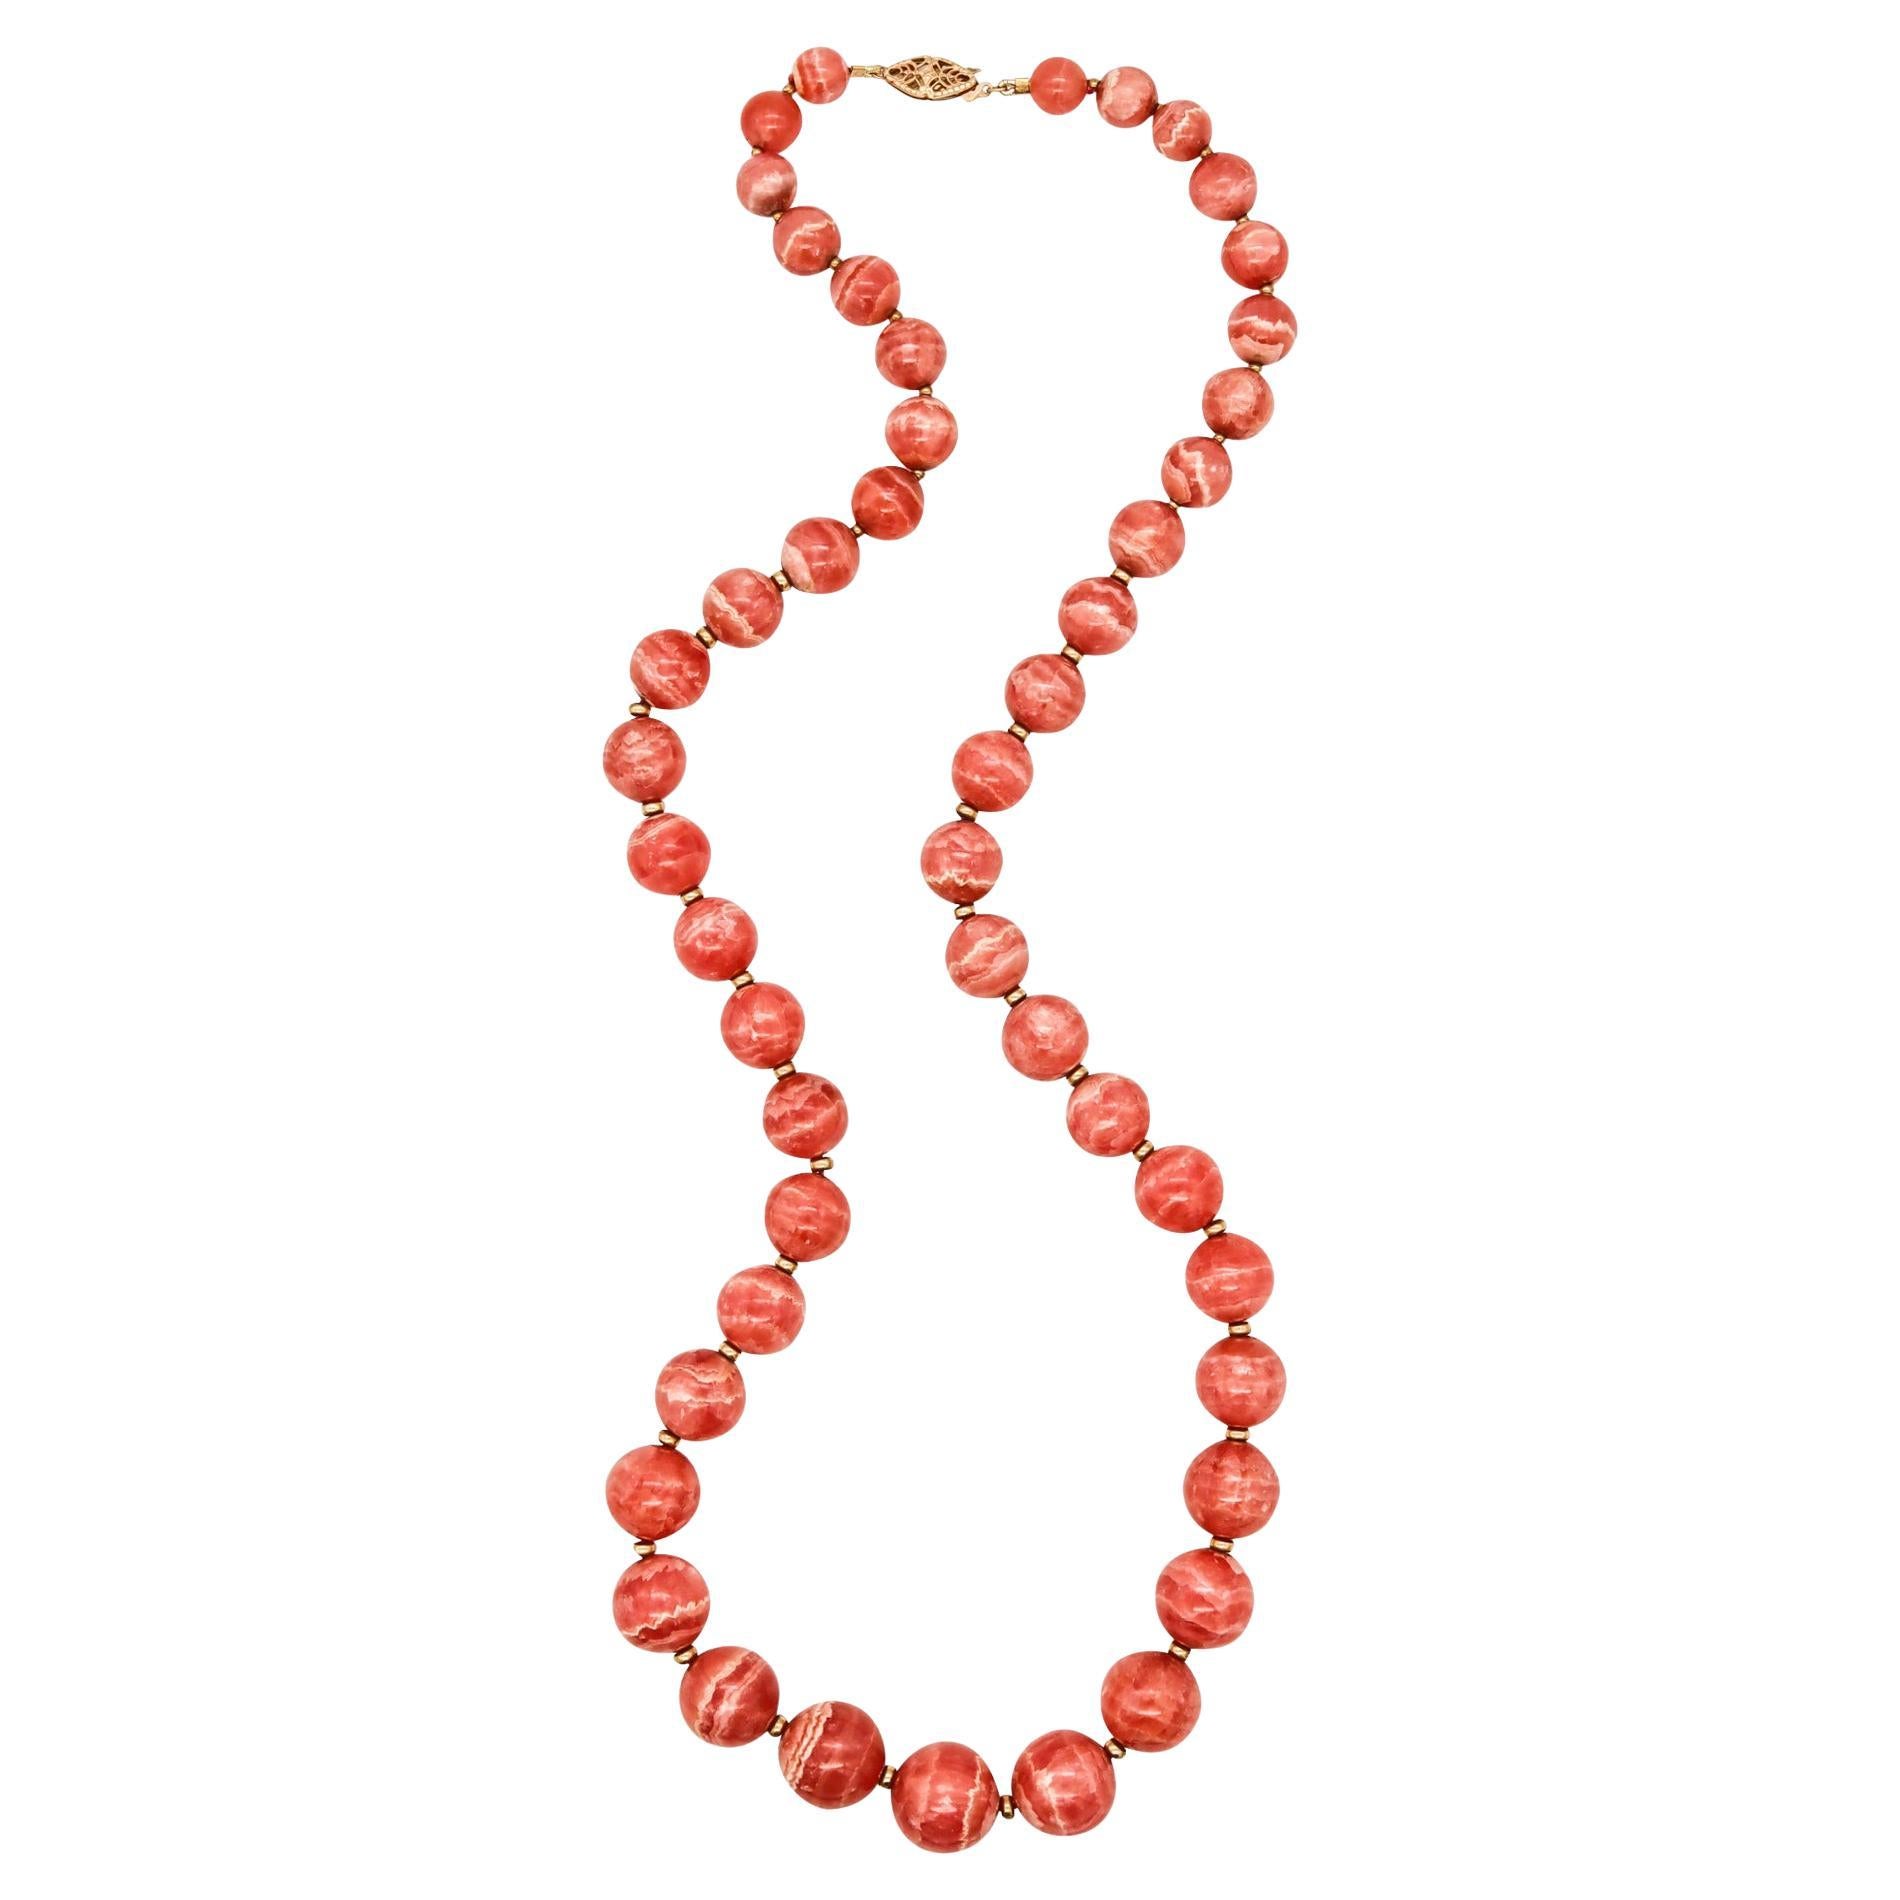 Rhodochrosite Graduated Necklace in 18Kt Gold with 645.25 Cts Superb Gemstones